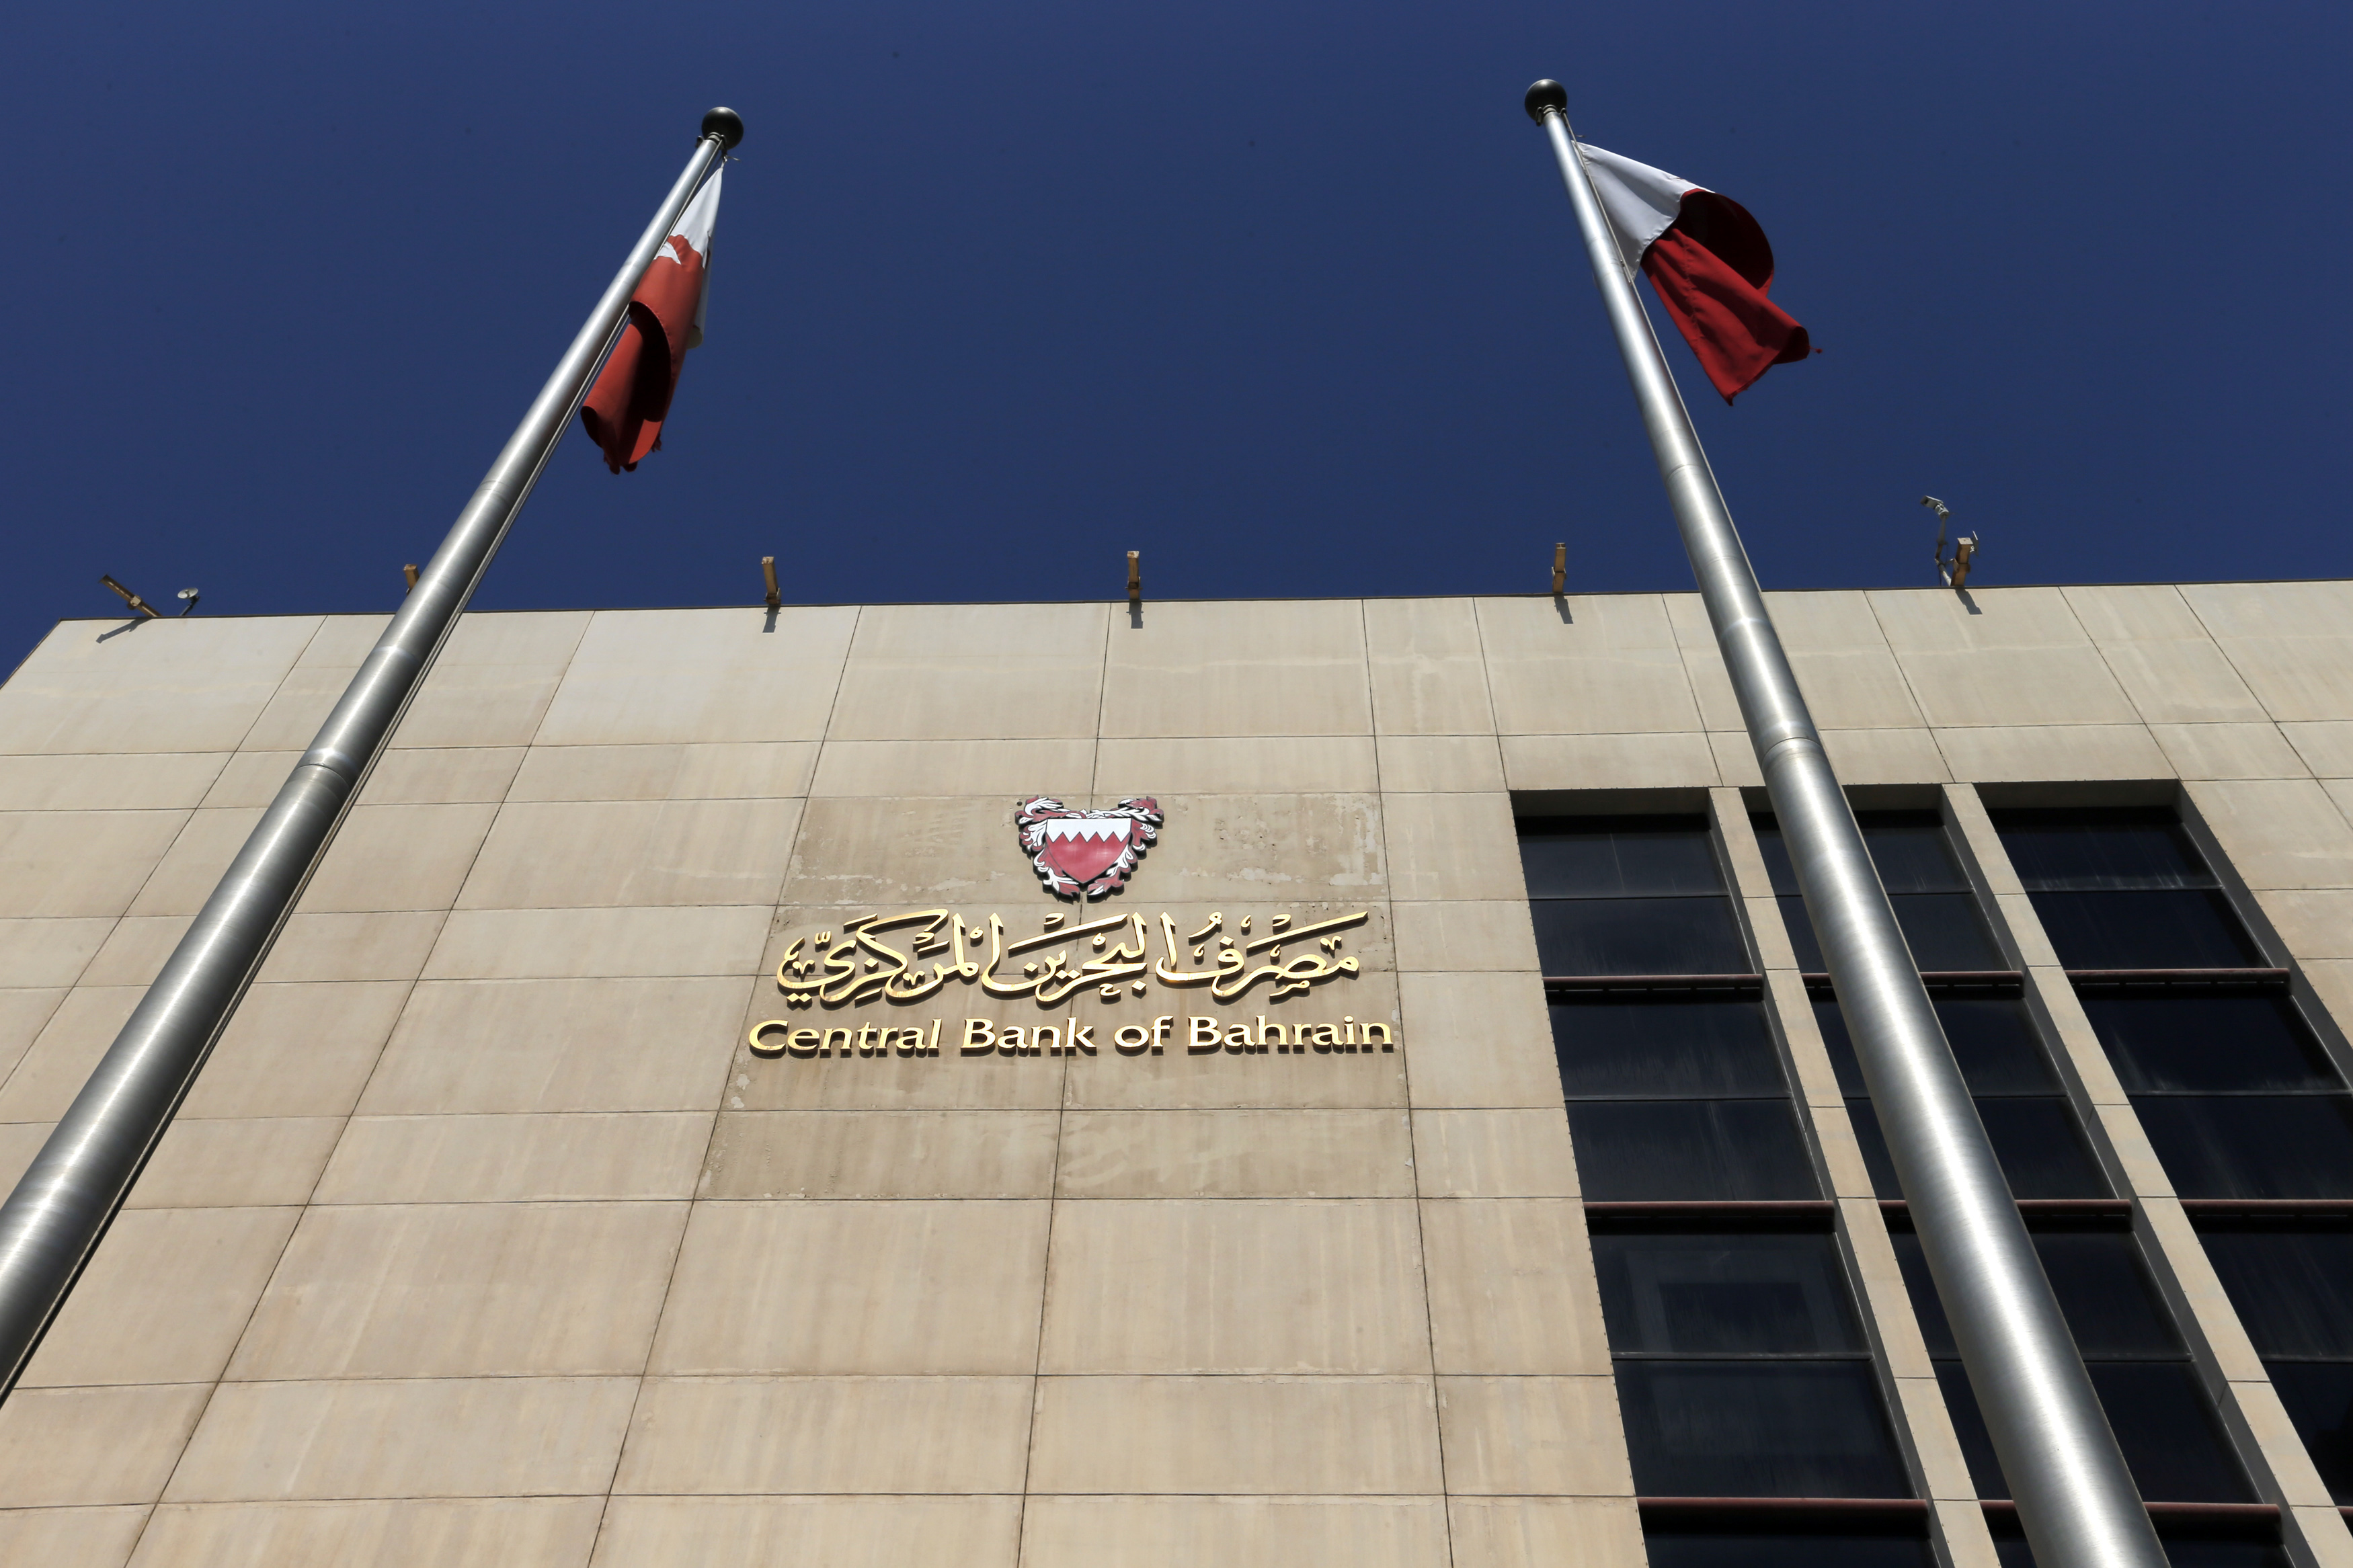 Exterior view of Central Bank of Bahrain in Manama